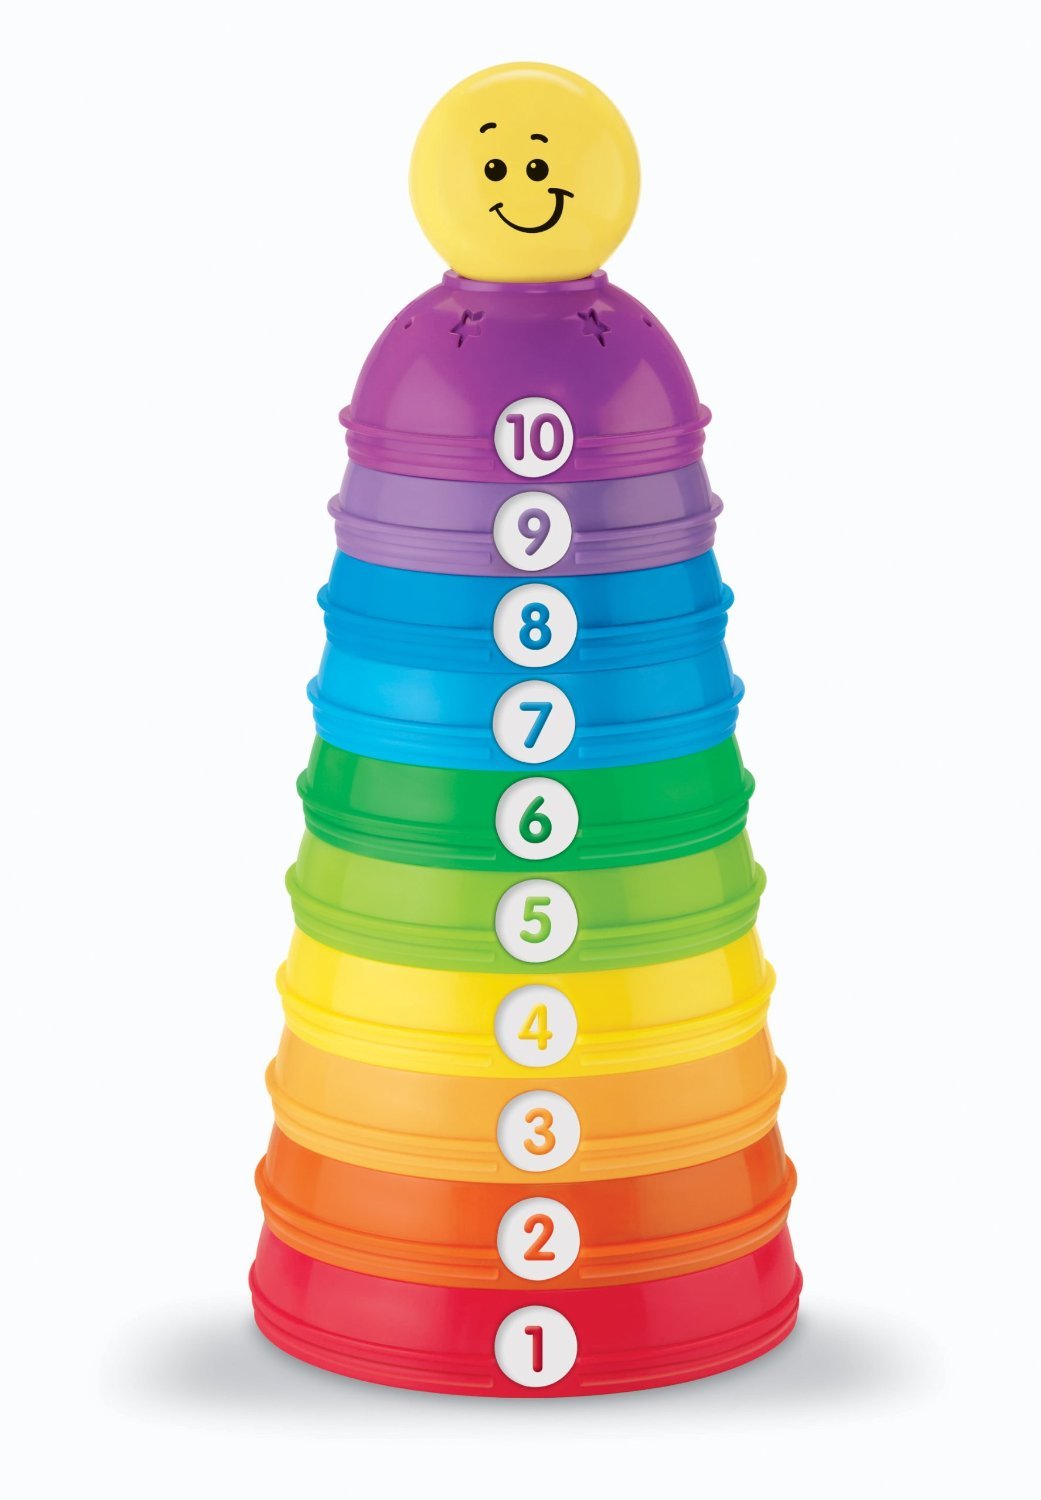 Top 9 Best Baby Stacking Toys Reviews in 2022 4